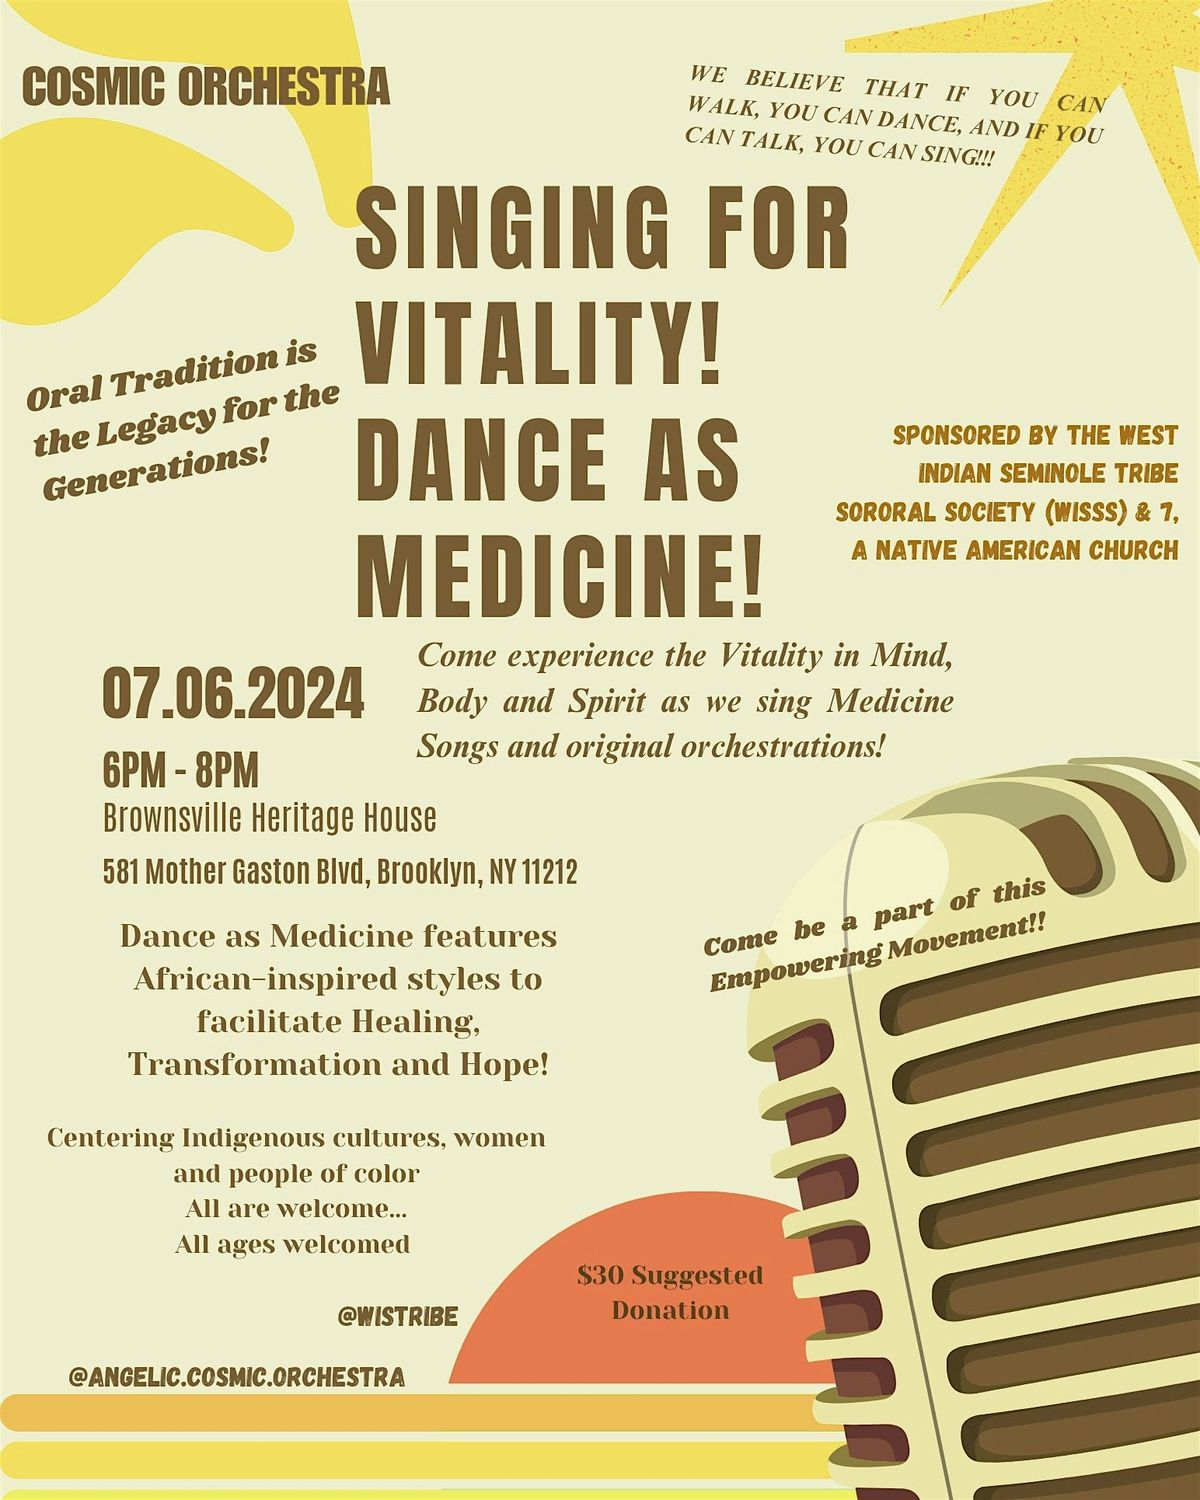 Singing for Vitality and Dance as Medicine